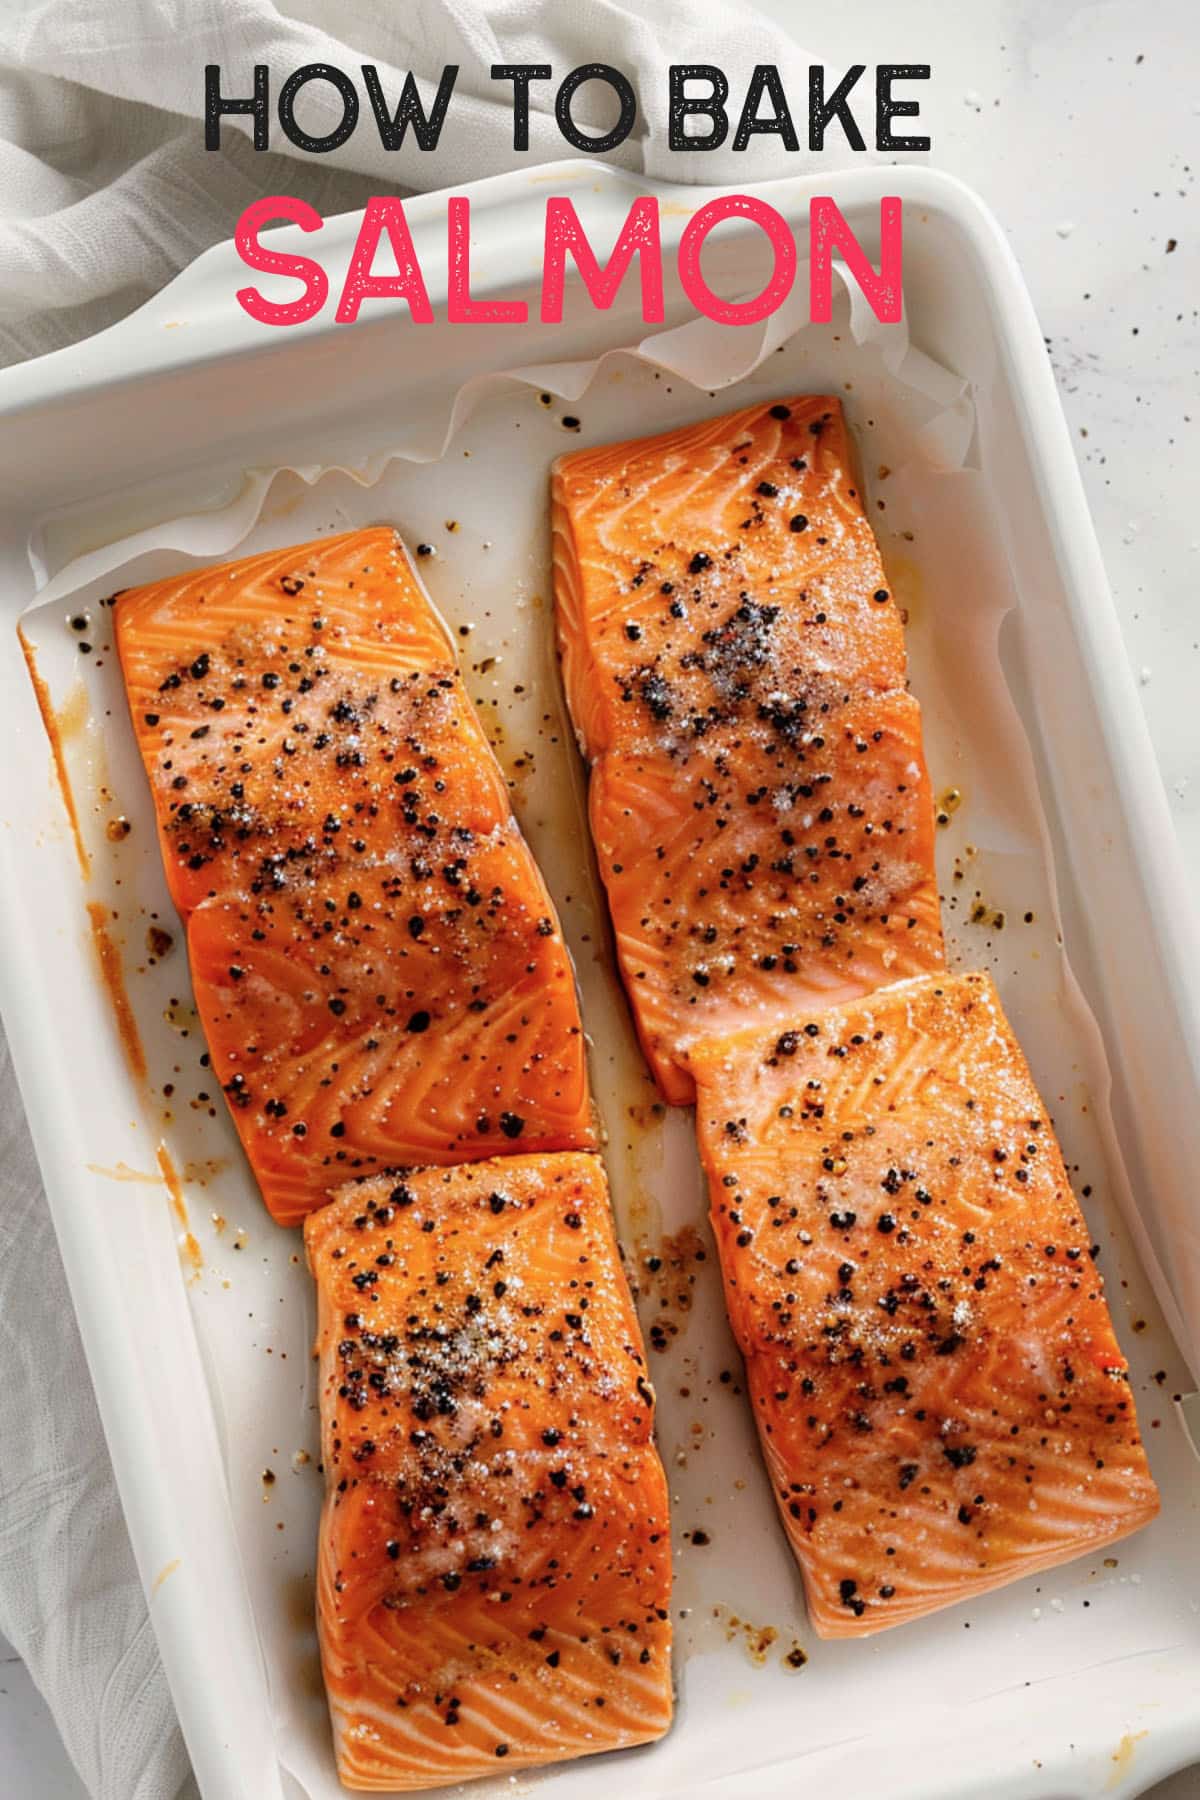 Step-by-step instructions on how to bake salmon, including seasoning and cooking times.